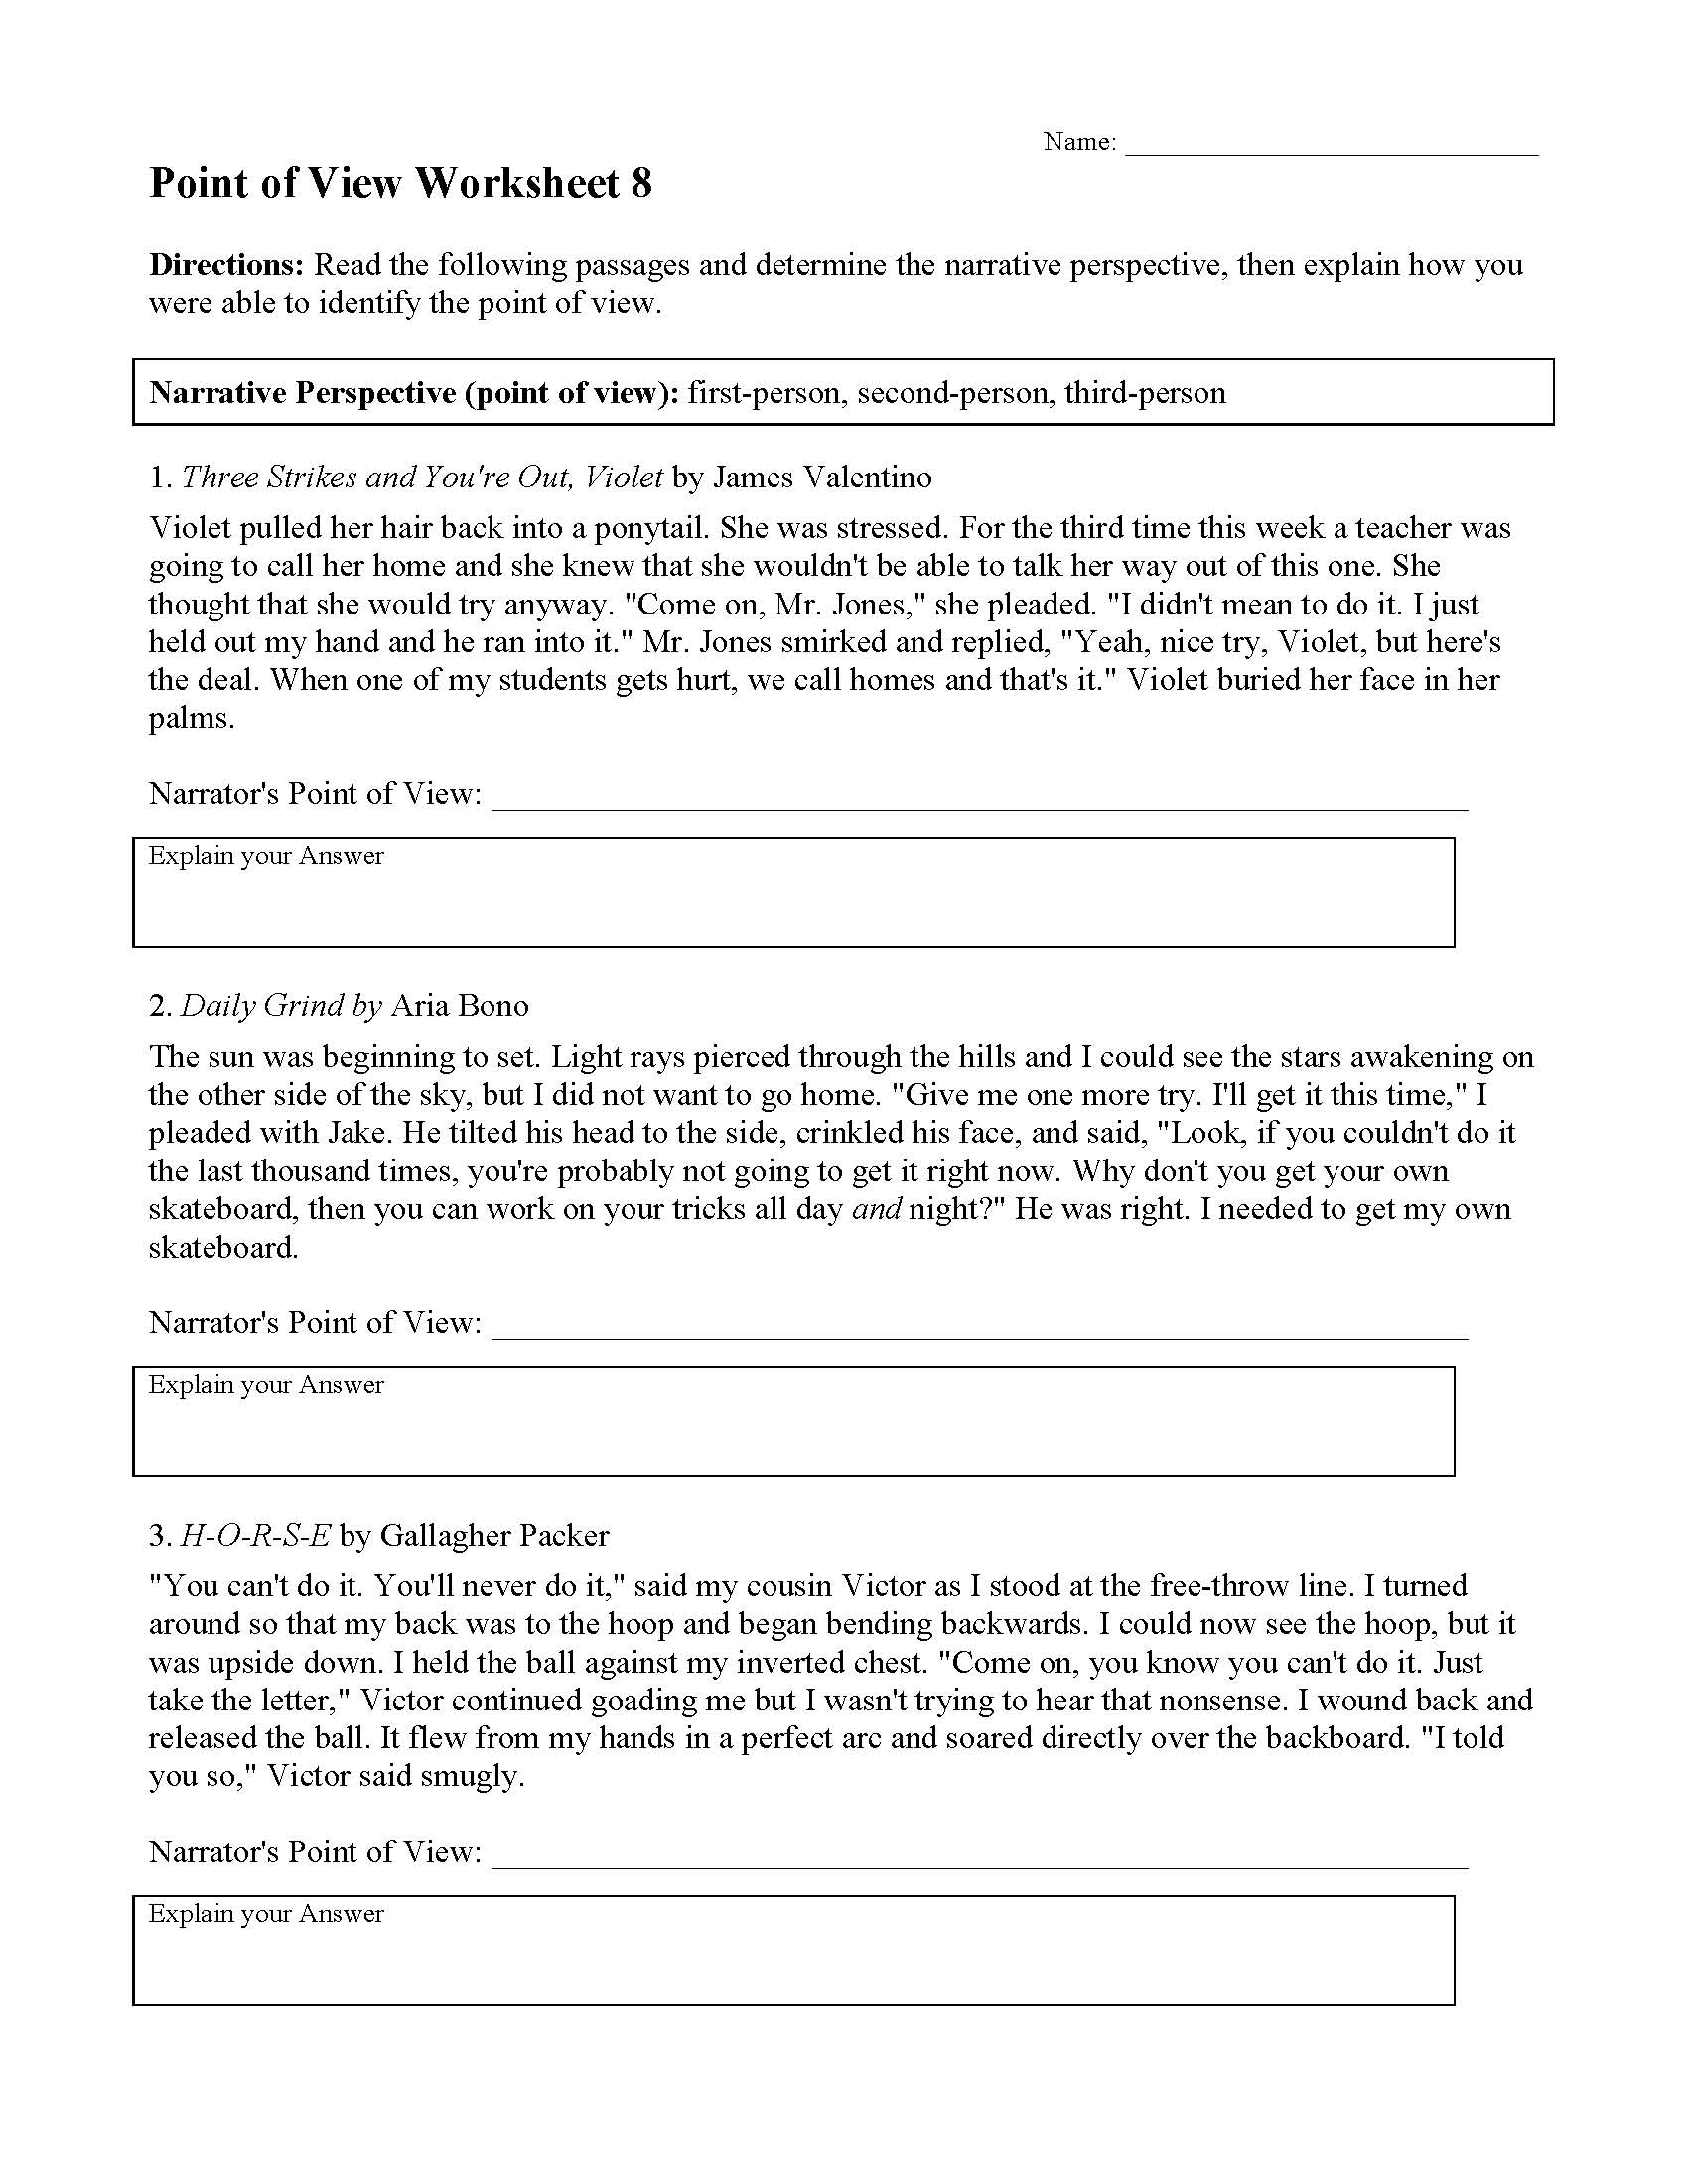 This is a preview image of Point of View Worksheet 8. Click on it to enlarge it or view the source file.